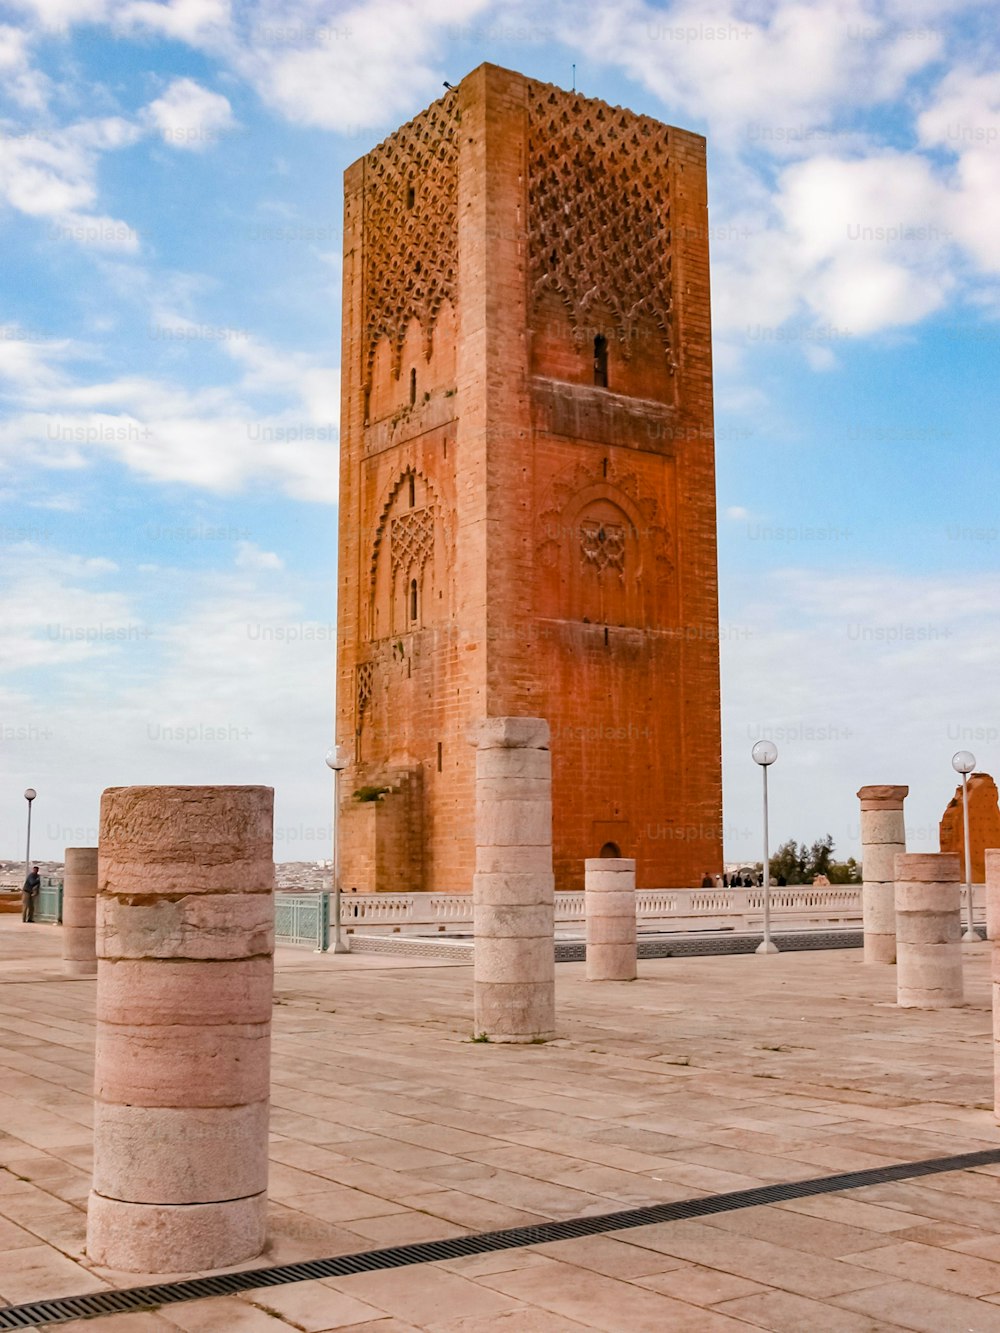 A vertical shot of the historical landmark of Tour Hassan tower in Rabat, Morocco